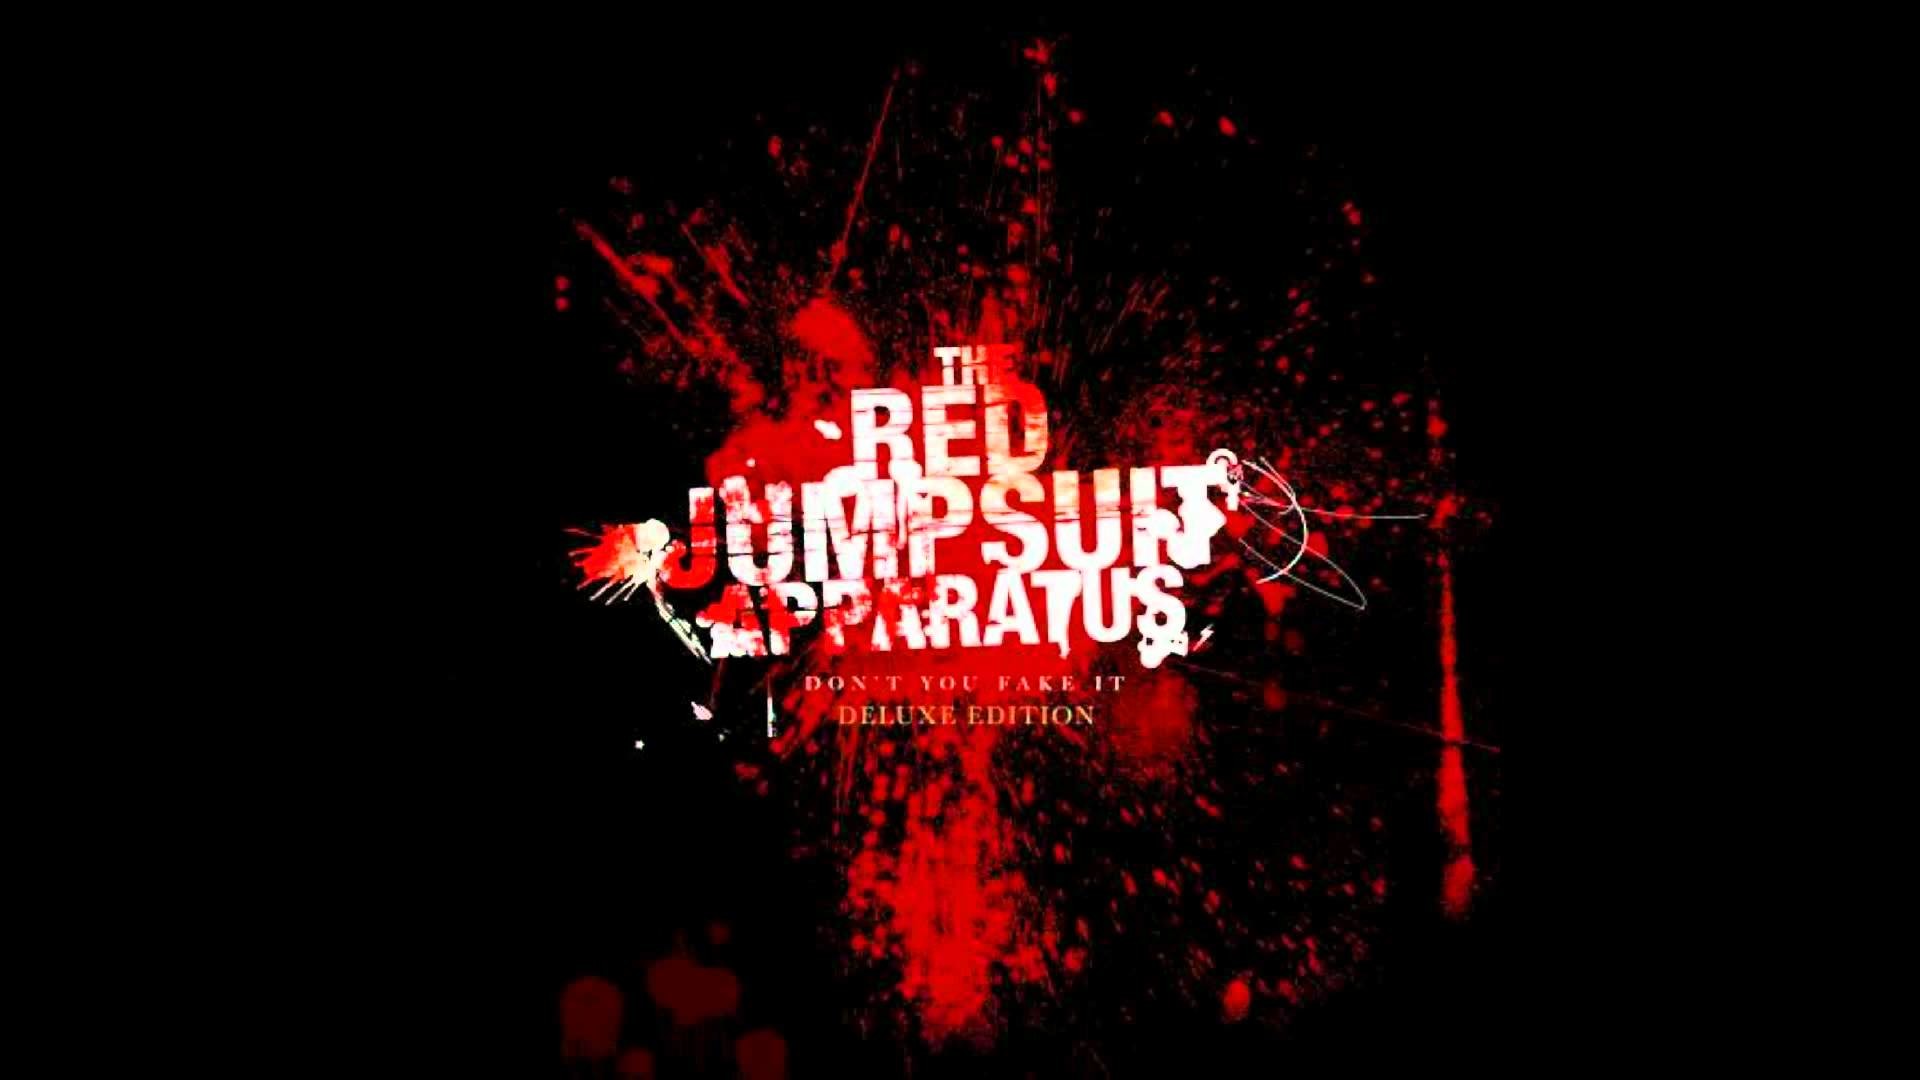 The red jumpsuit apparatus. The Red Jumpsuit apparatus logo. Face down the Red Jumpsuit apparatus. The Red Jumpsuit apparatus false pretense.